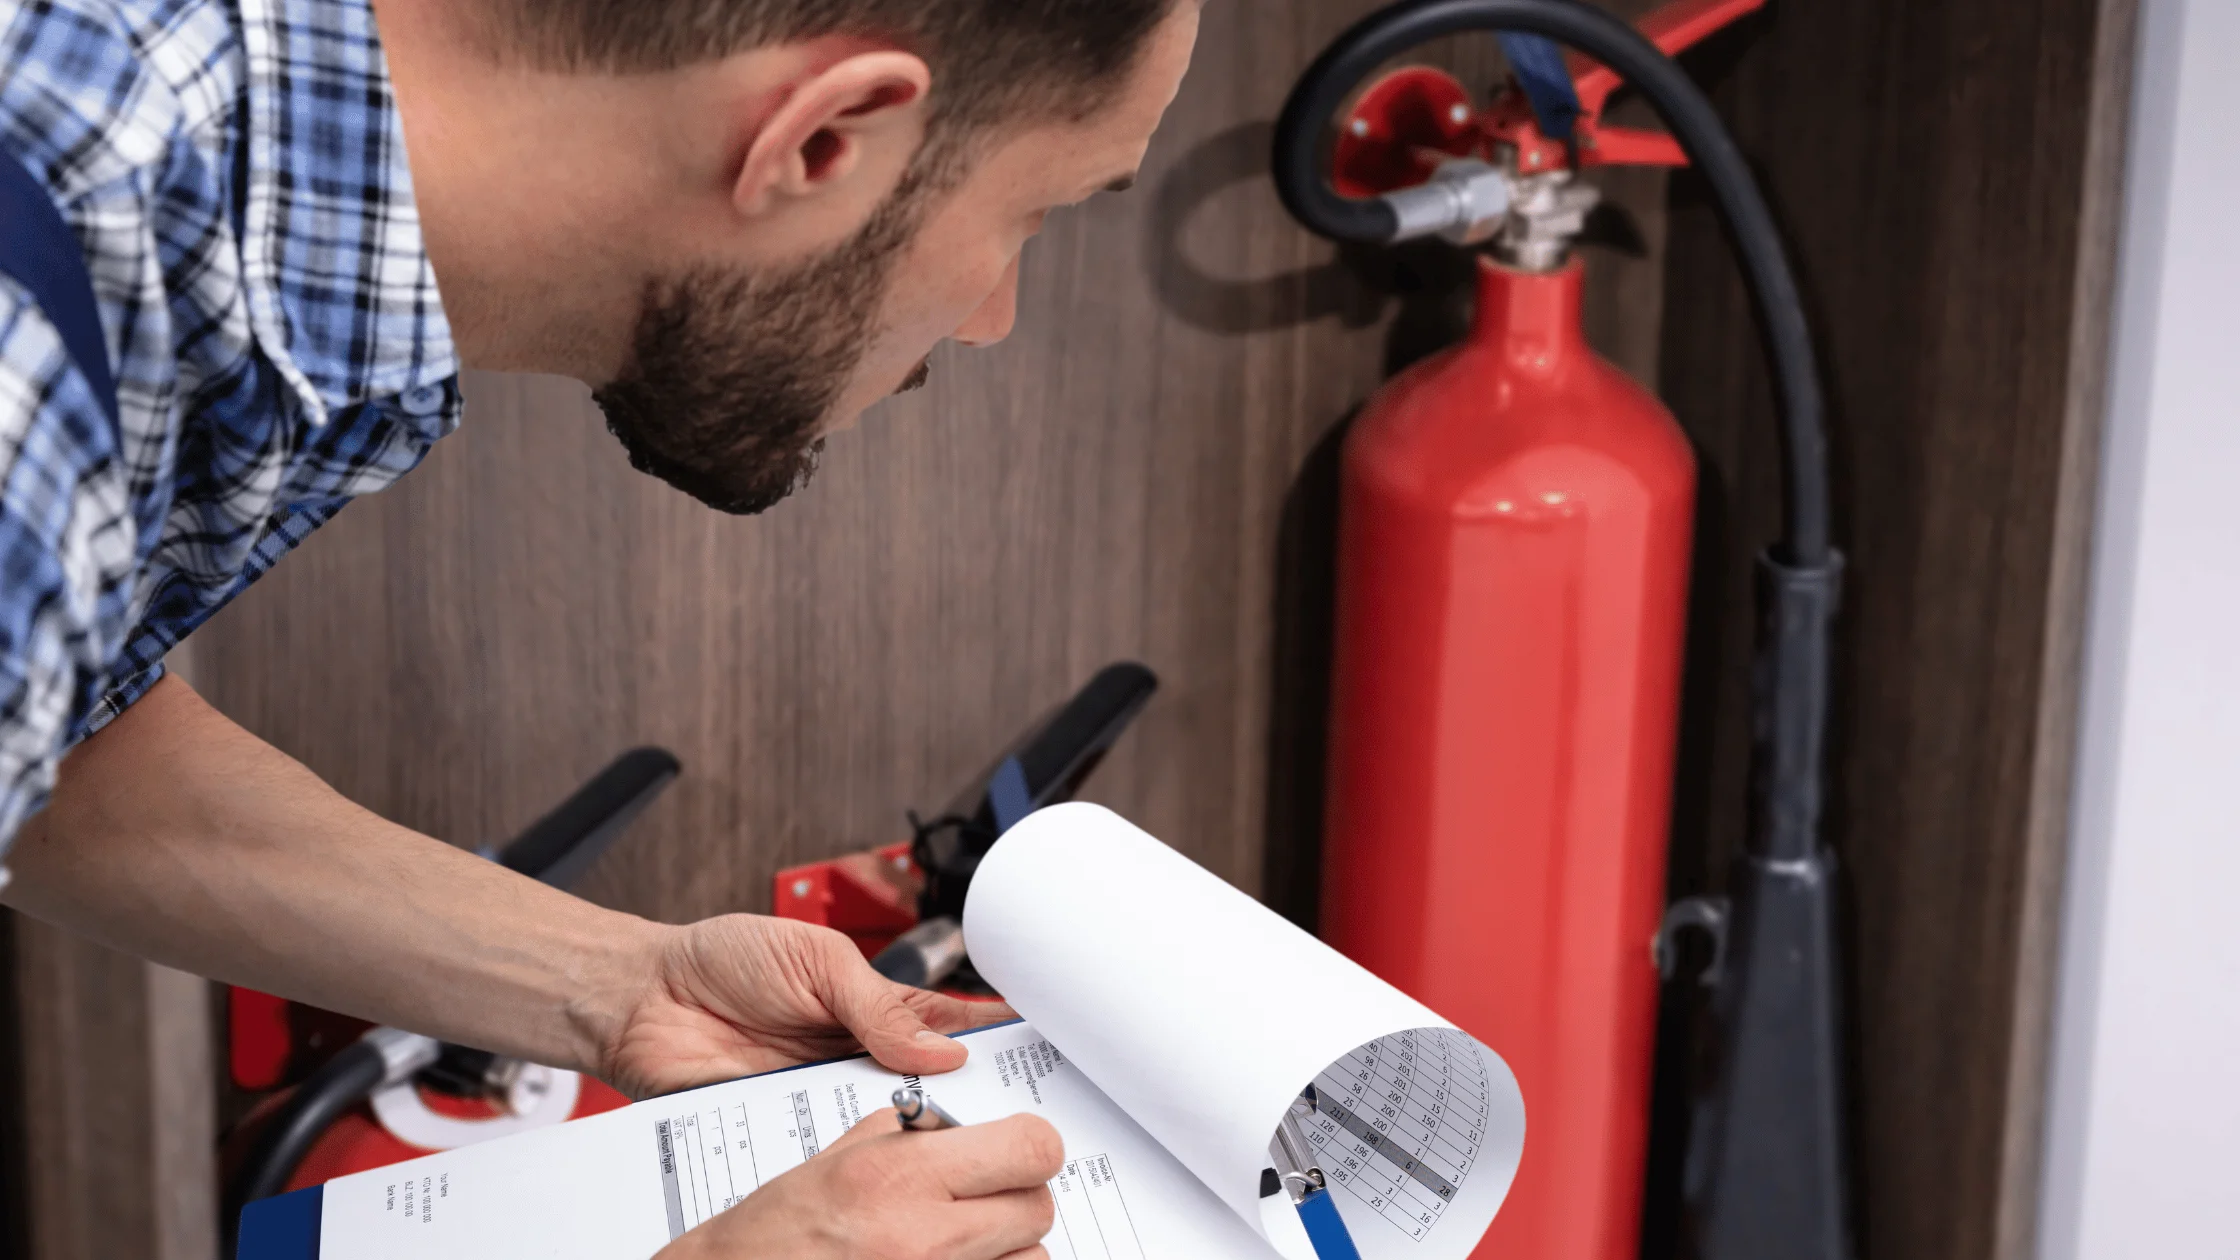 worker inspecting a fire extinguisher